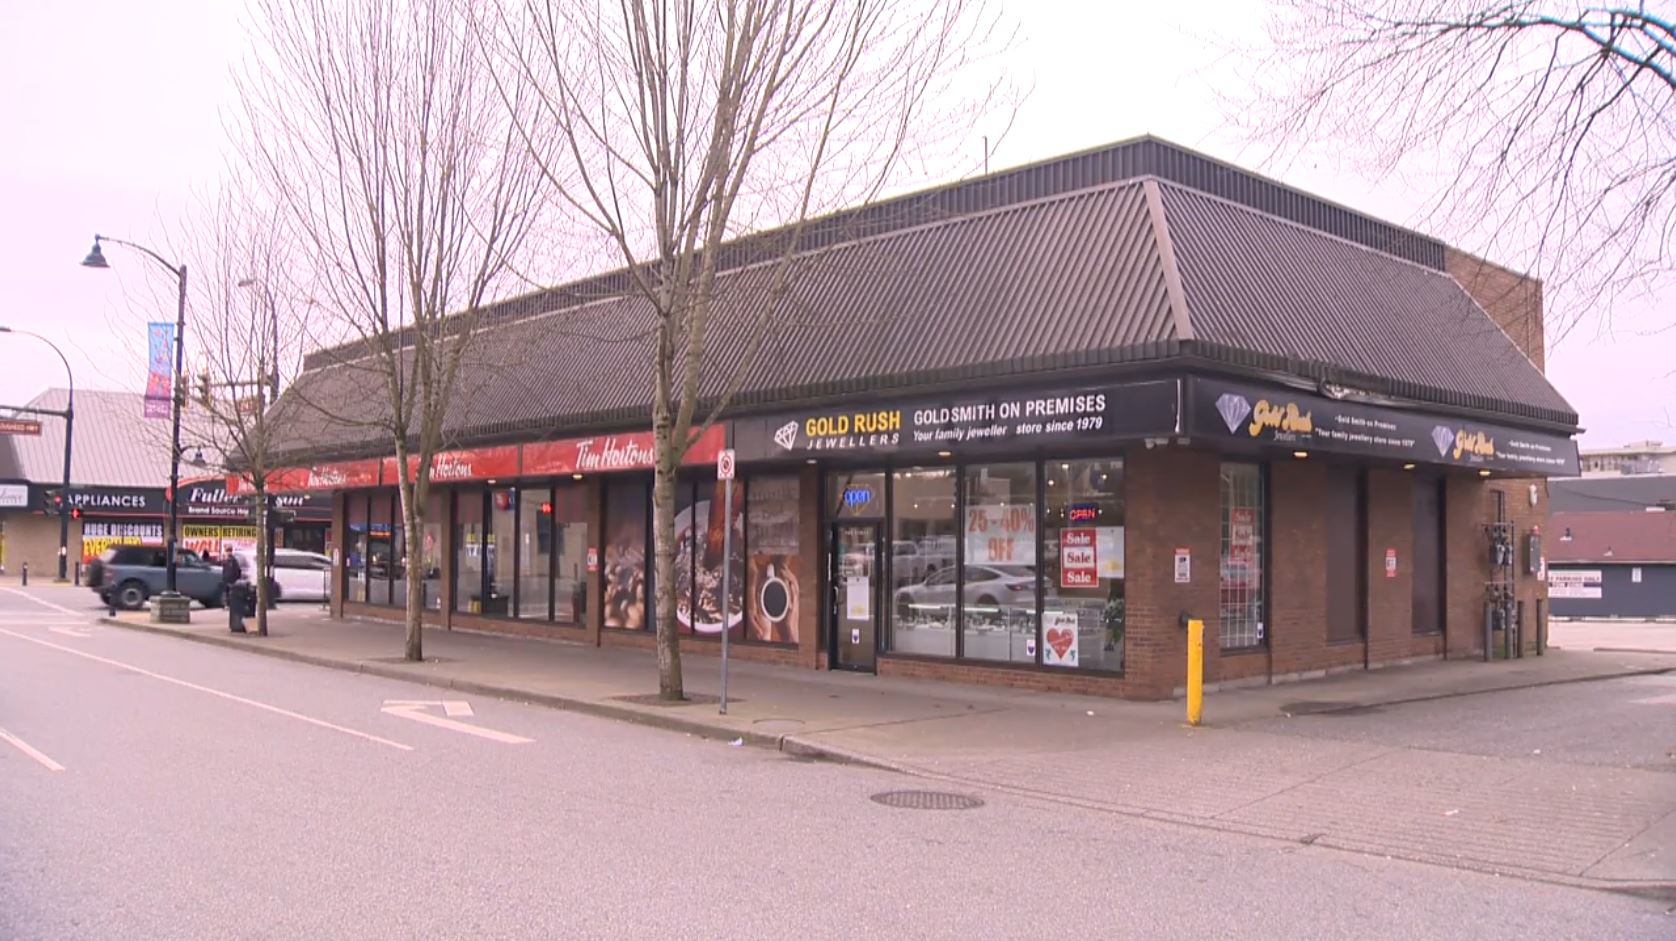 Maple Ridge business closing shop due to open drug use, threats